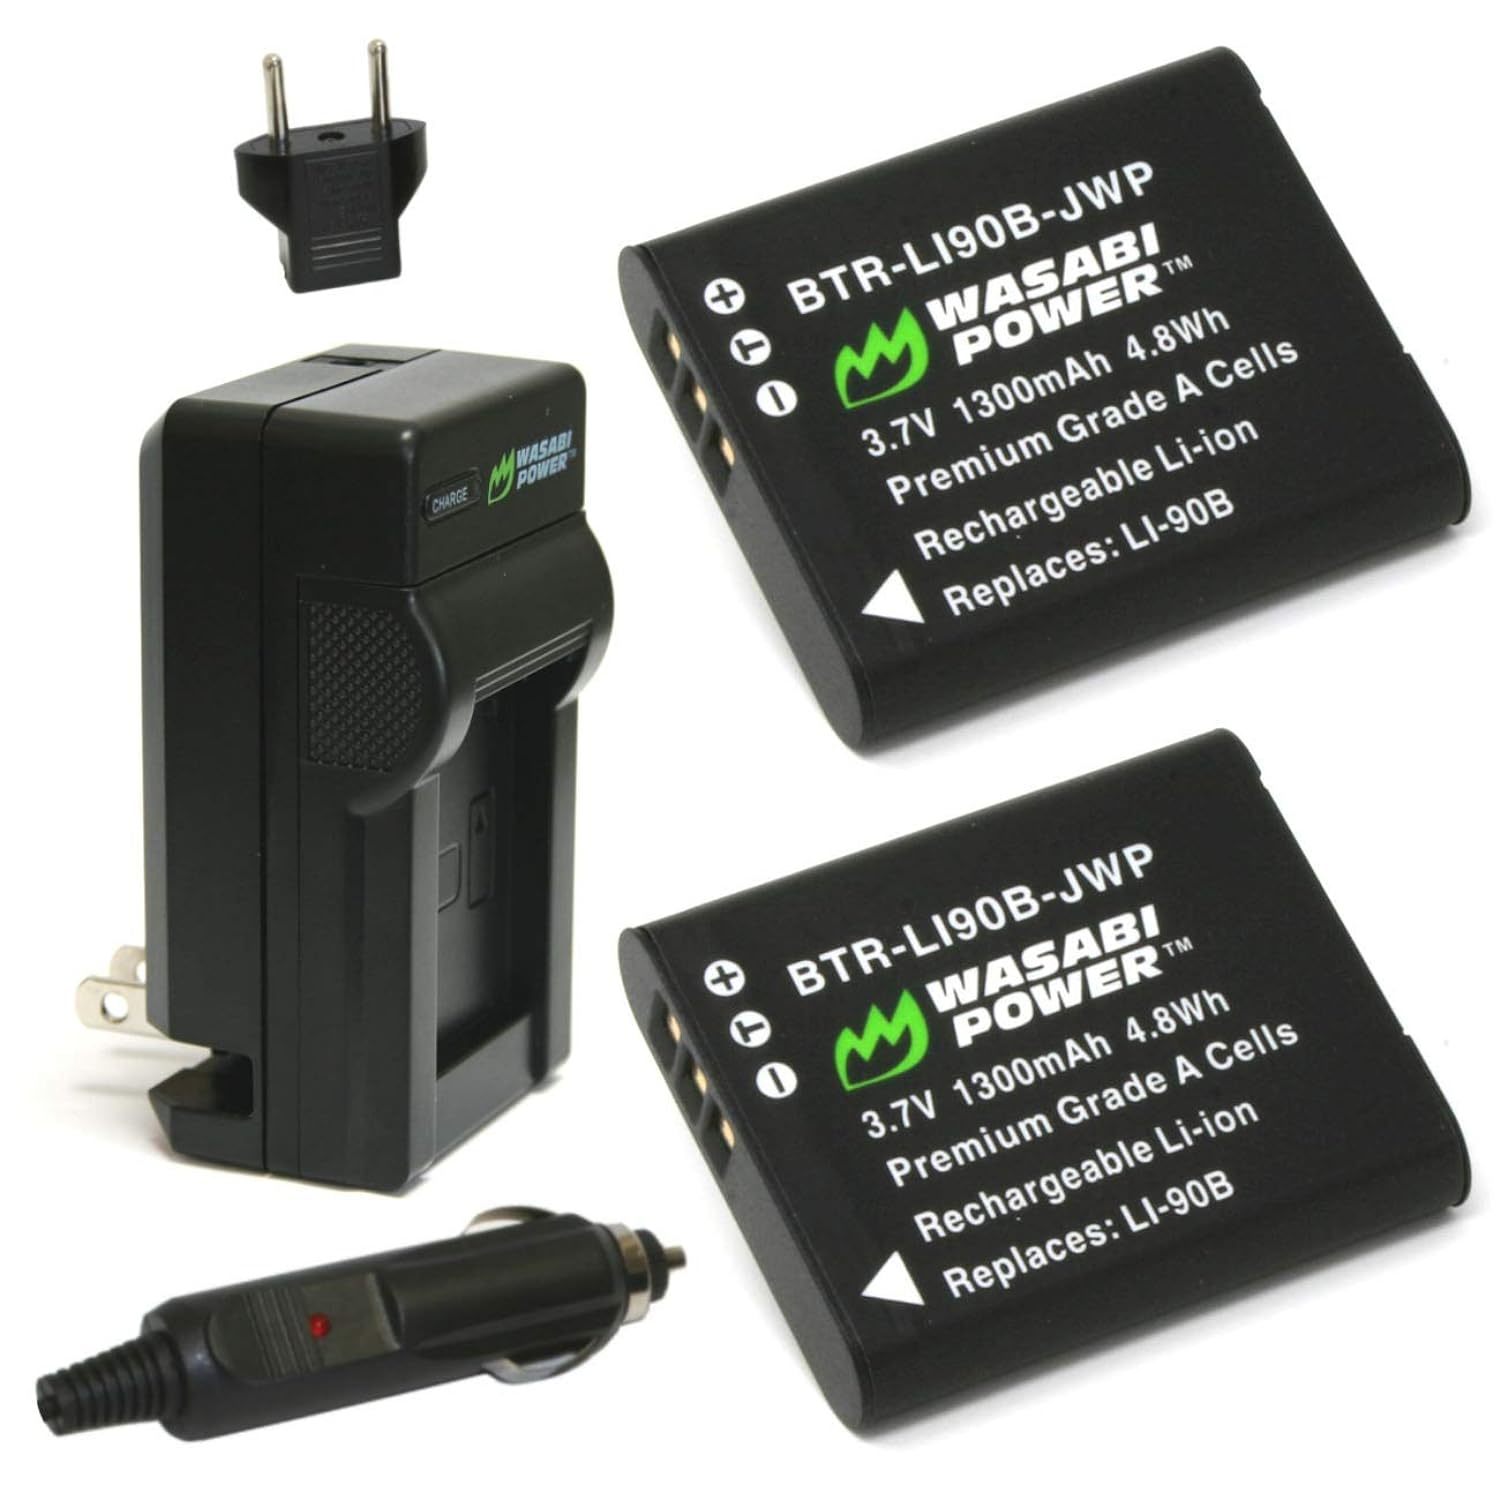 Primary image for Wasabi Power Battery (2-Pack) and Charger for Olympus LI-90B, LI-92B and Olympus